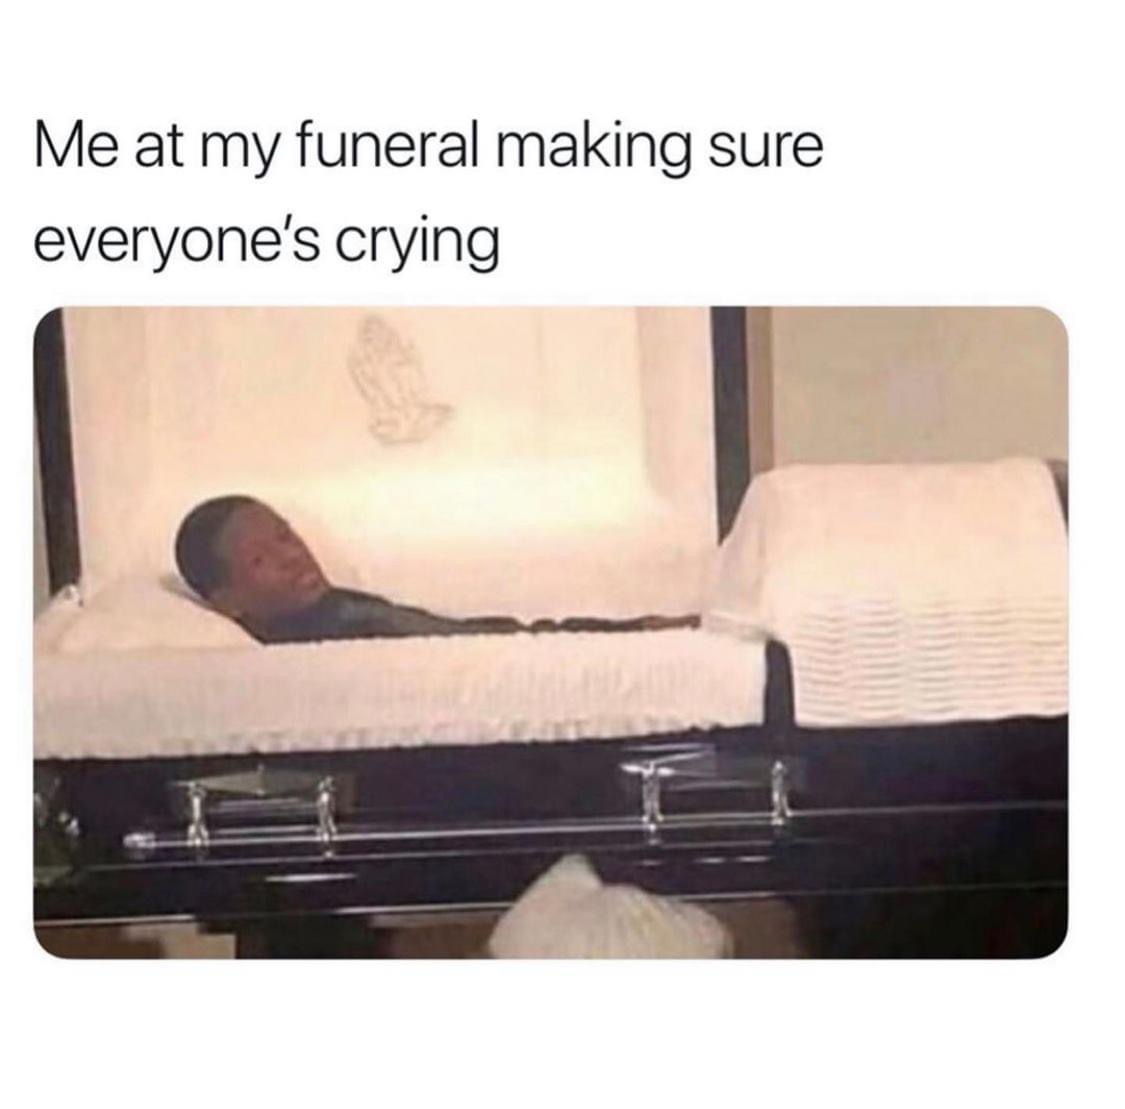 me at my funeral meme - Me at my funeral making sure everyone's crying